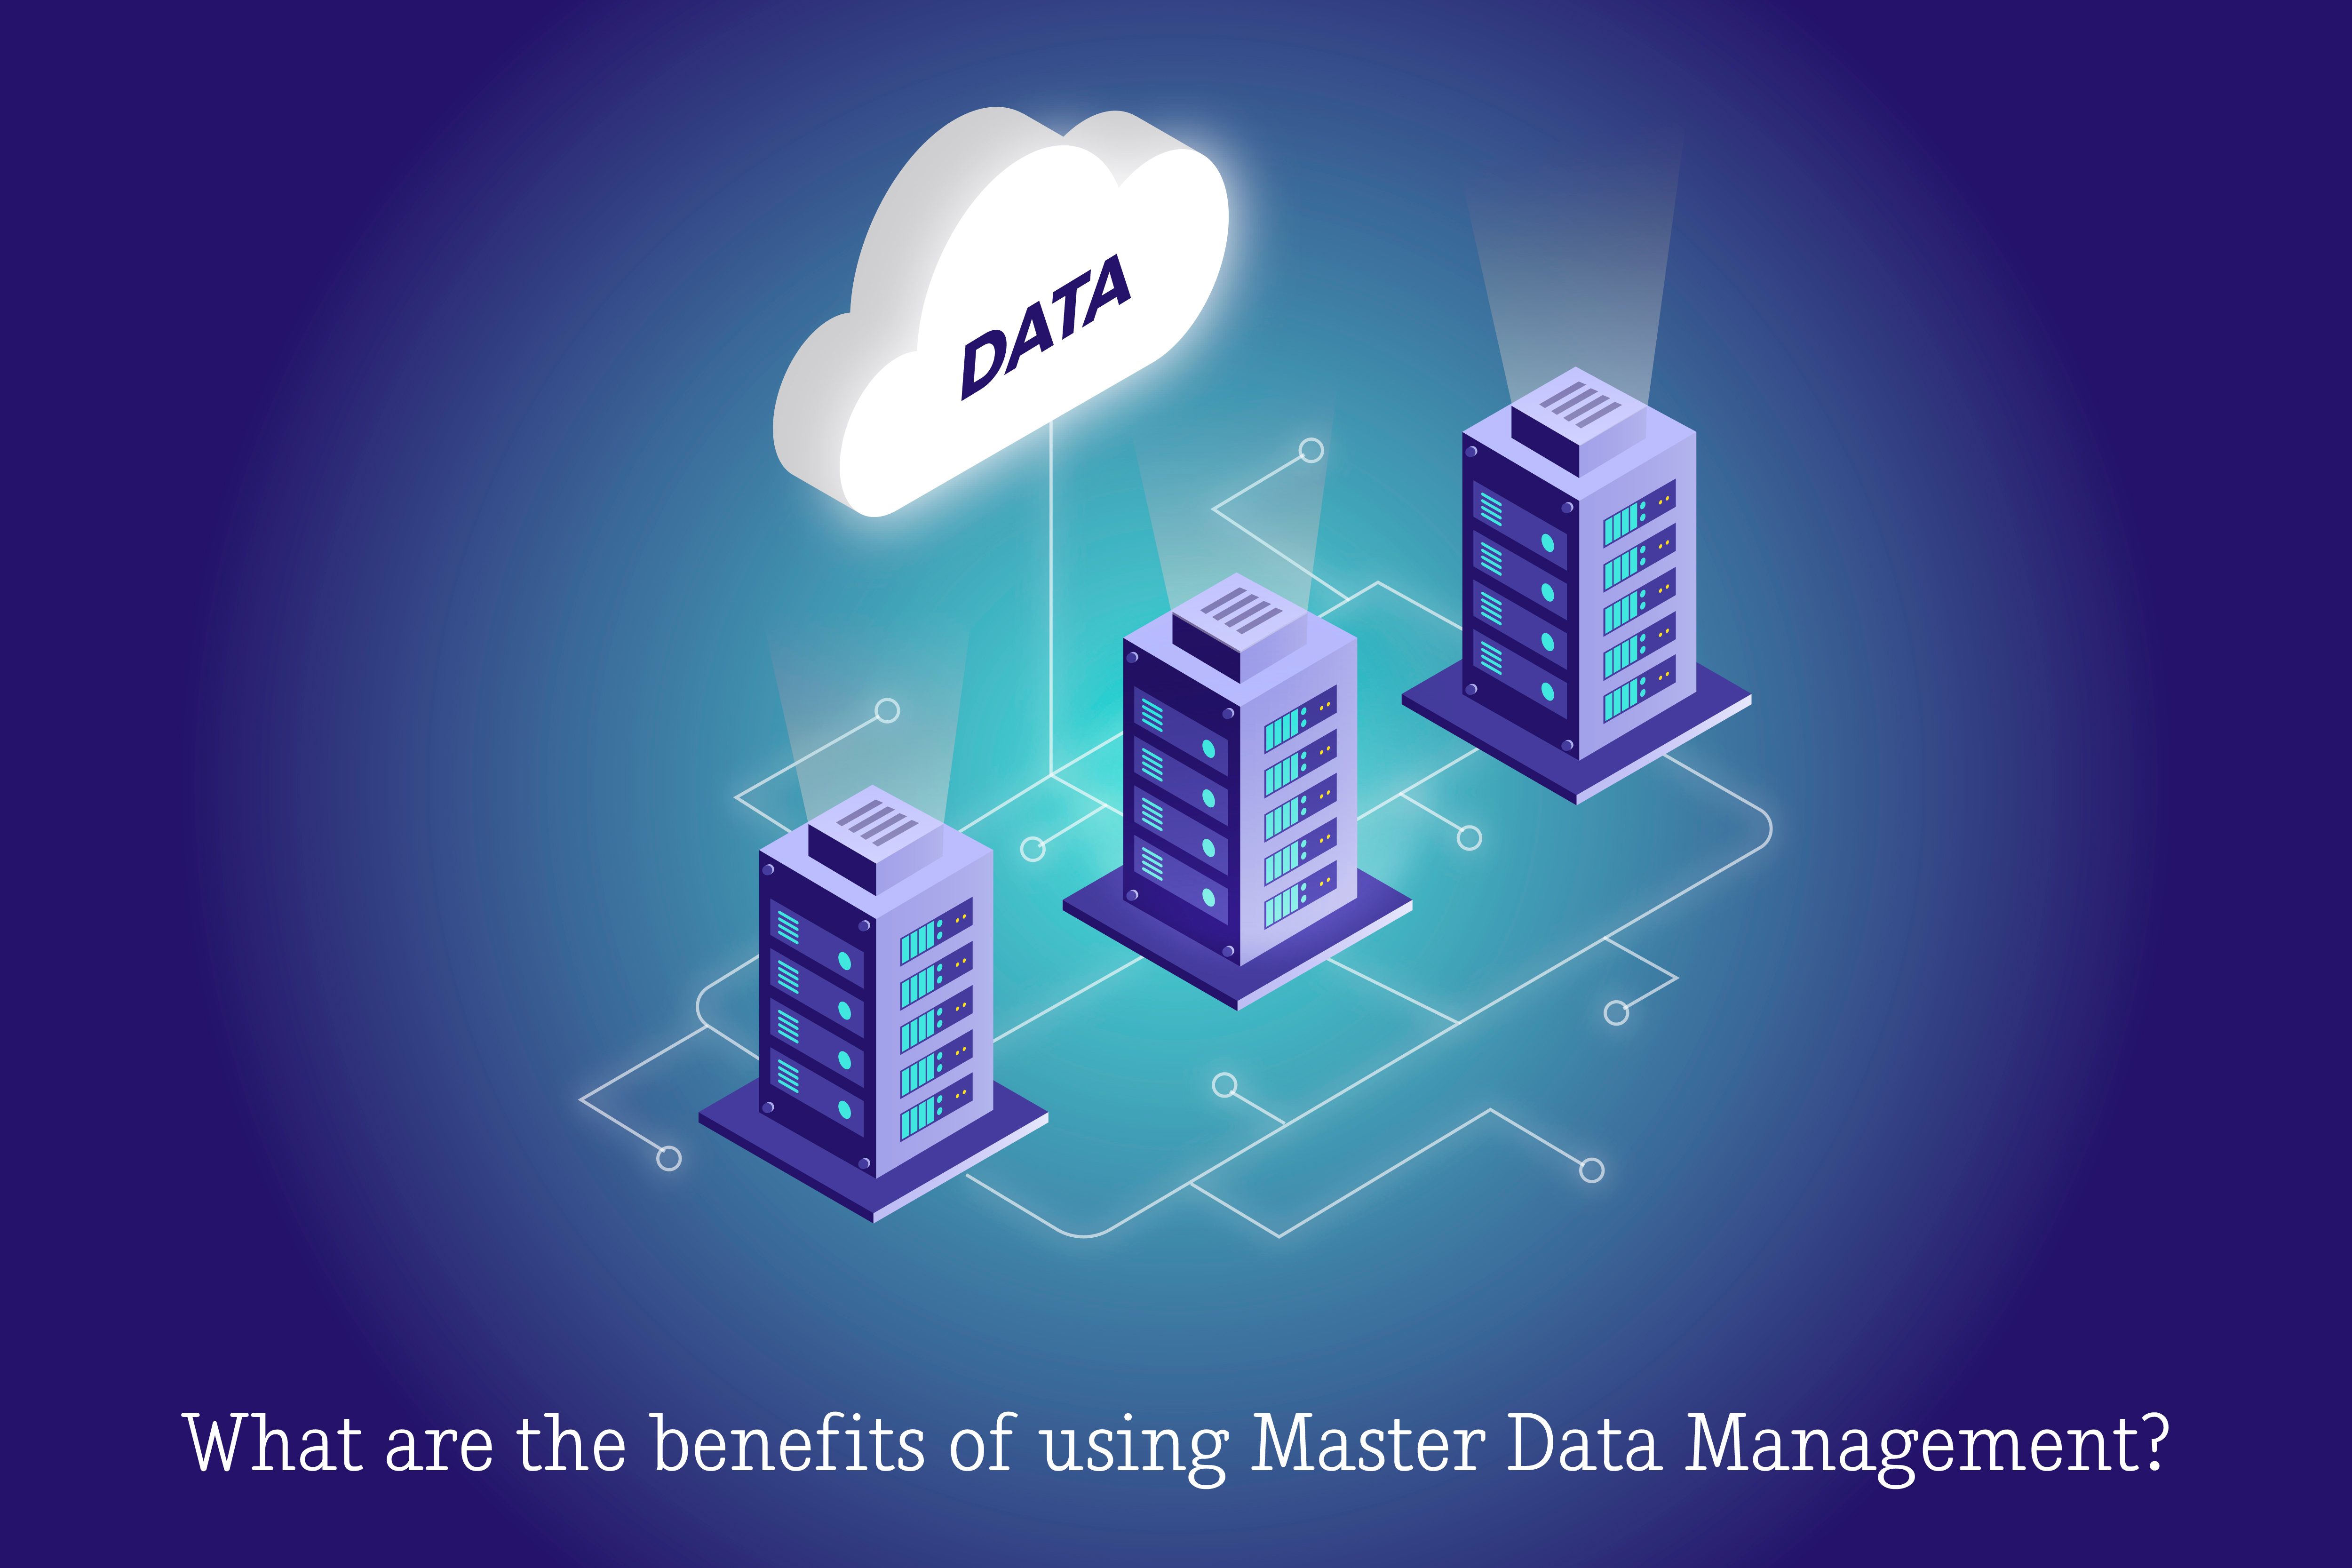 What are the benefits of using Master Data Management?